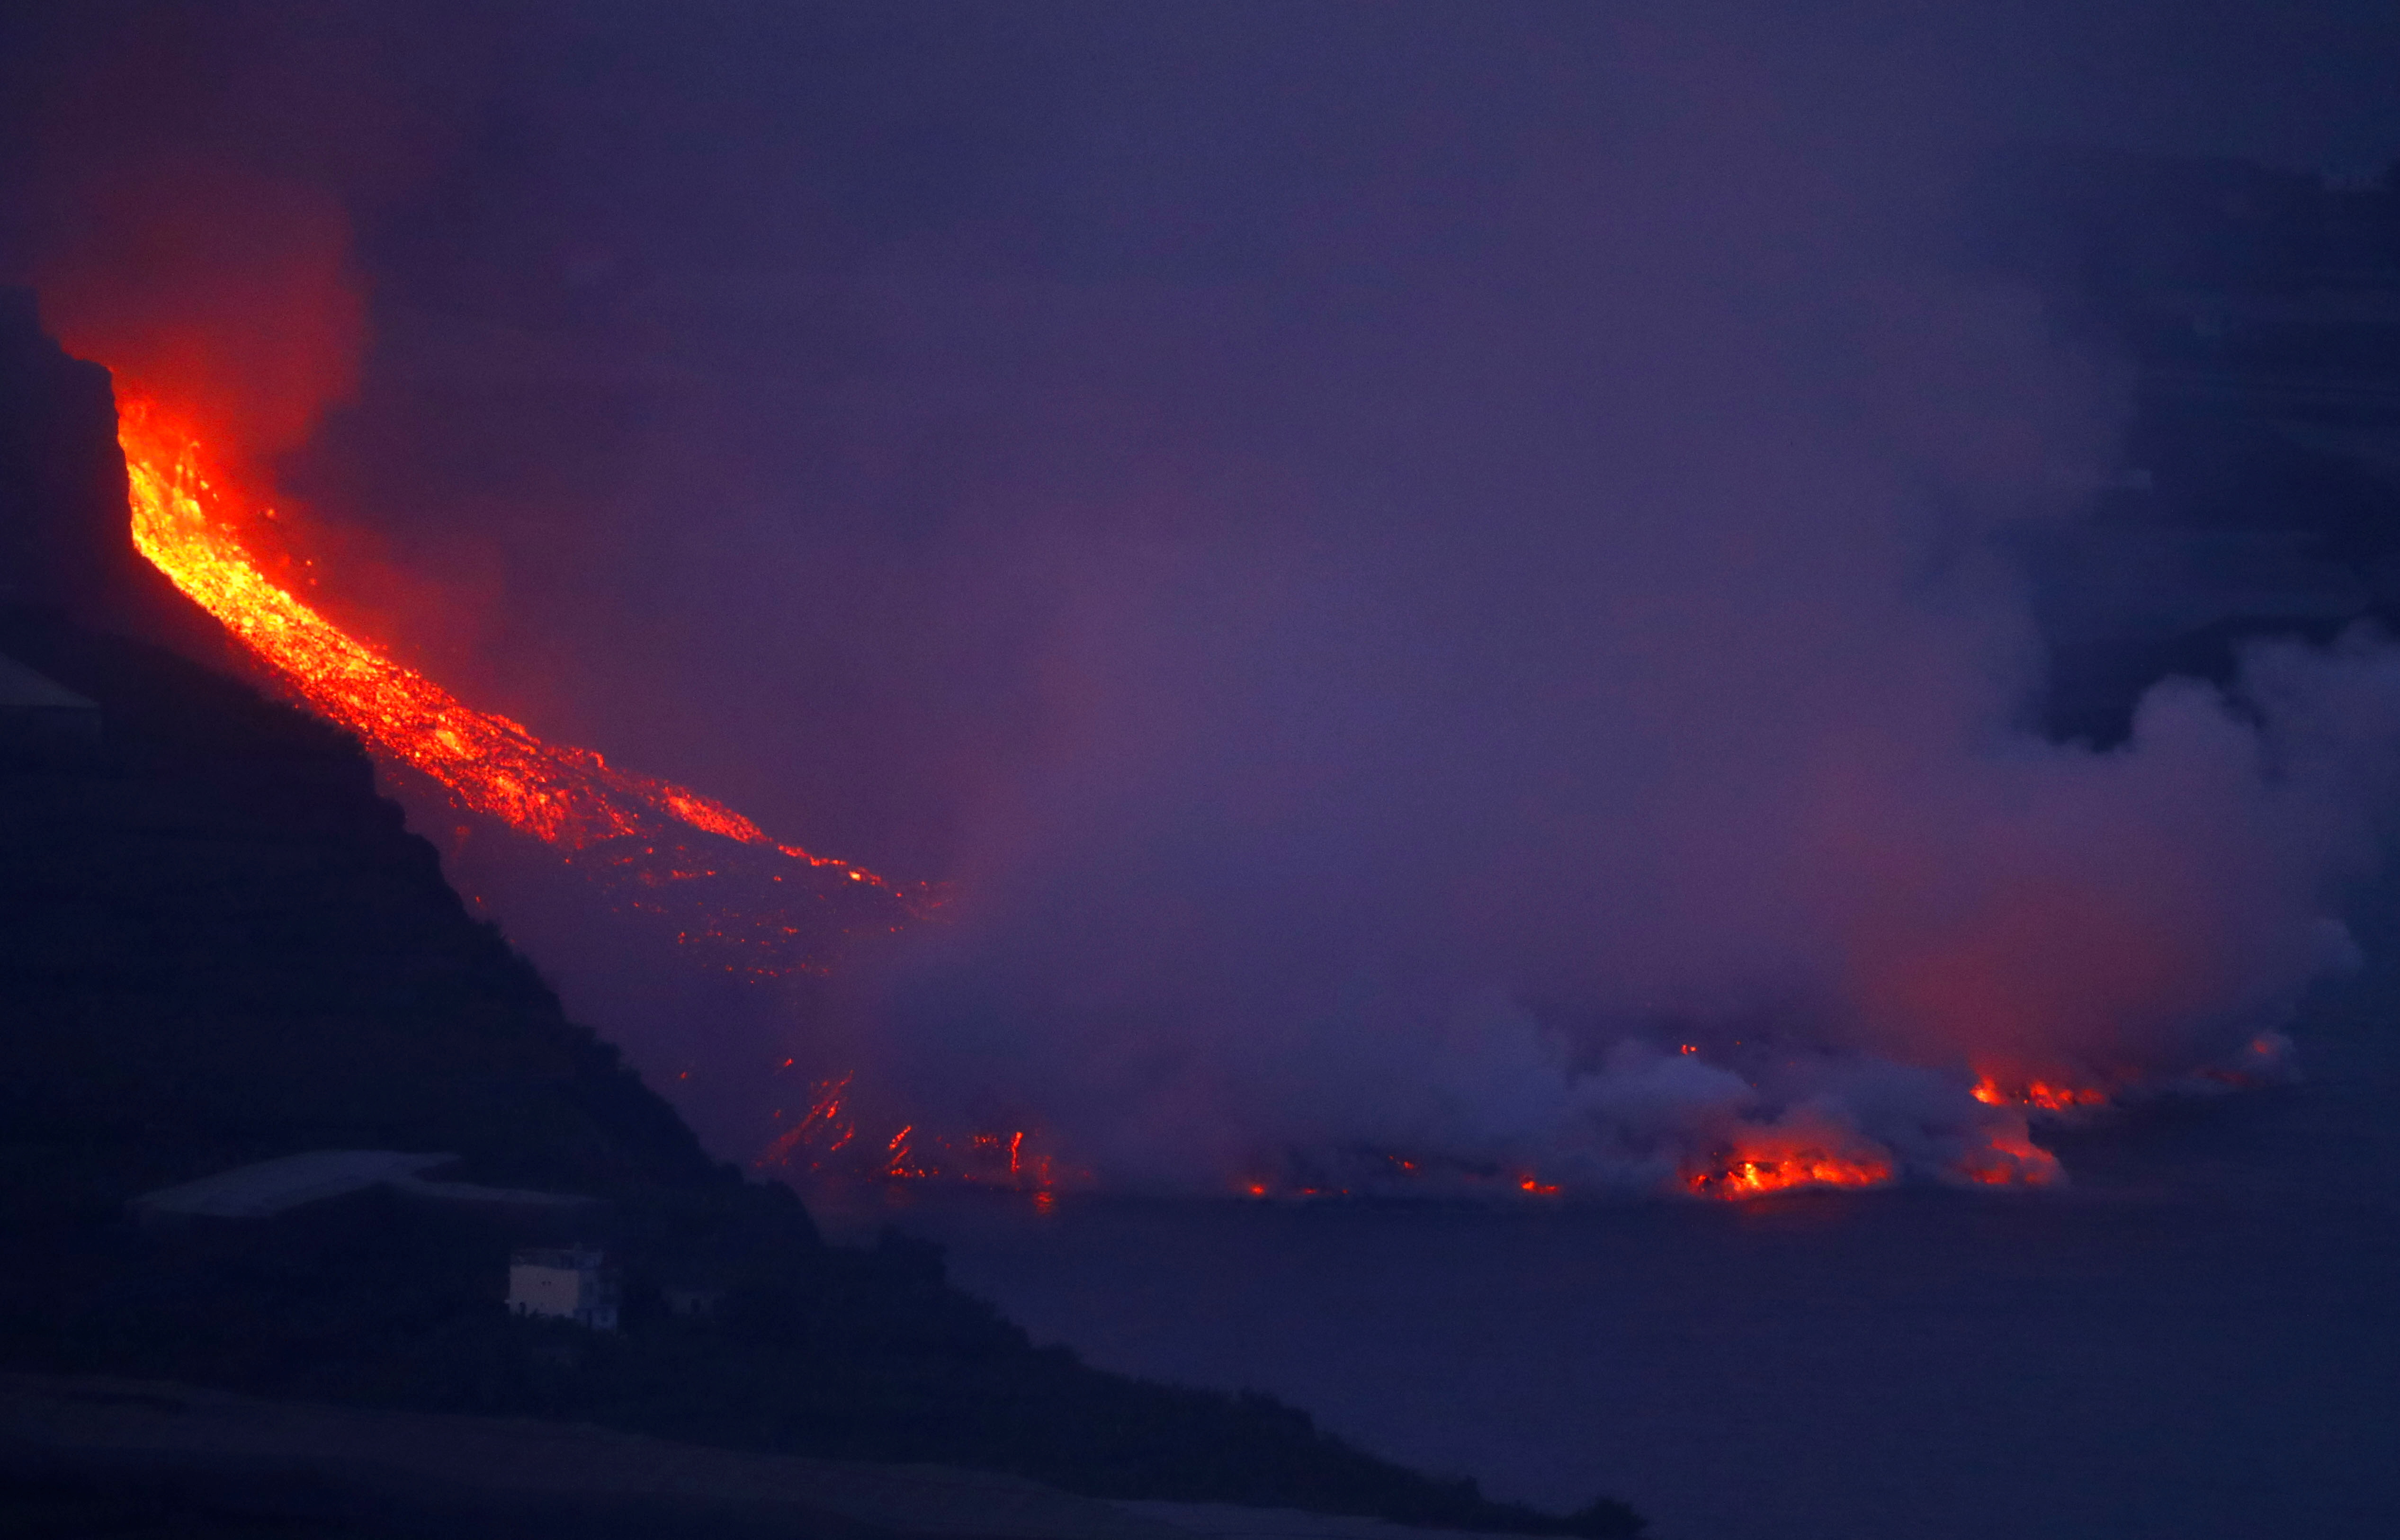 Lava flows into the sea, as seen from Tijarafe, following the eruption of a volcano on the Canary Island of La Palma, Spain, September 29, 2021. REUTERS/Borja Suarez